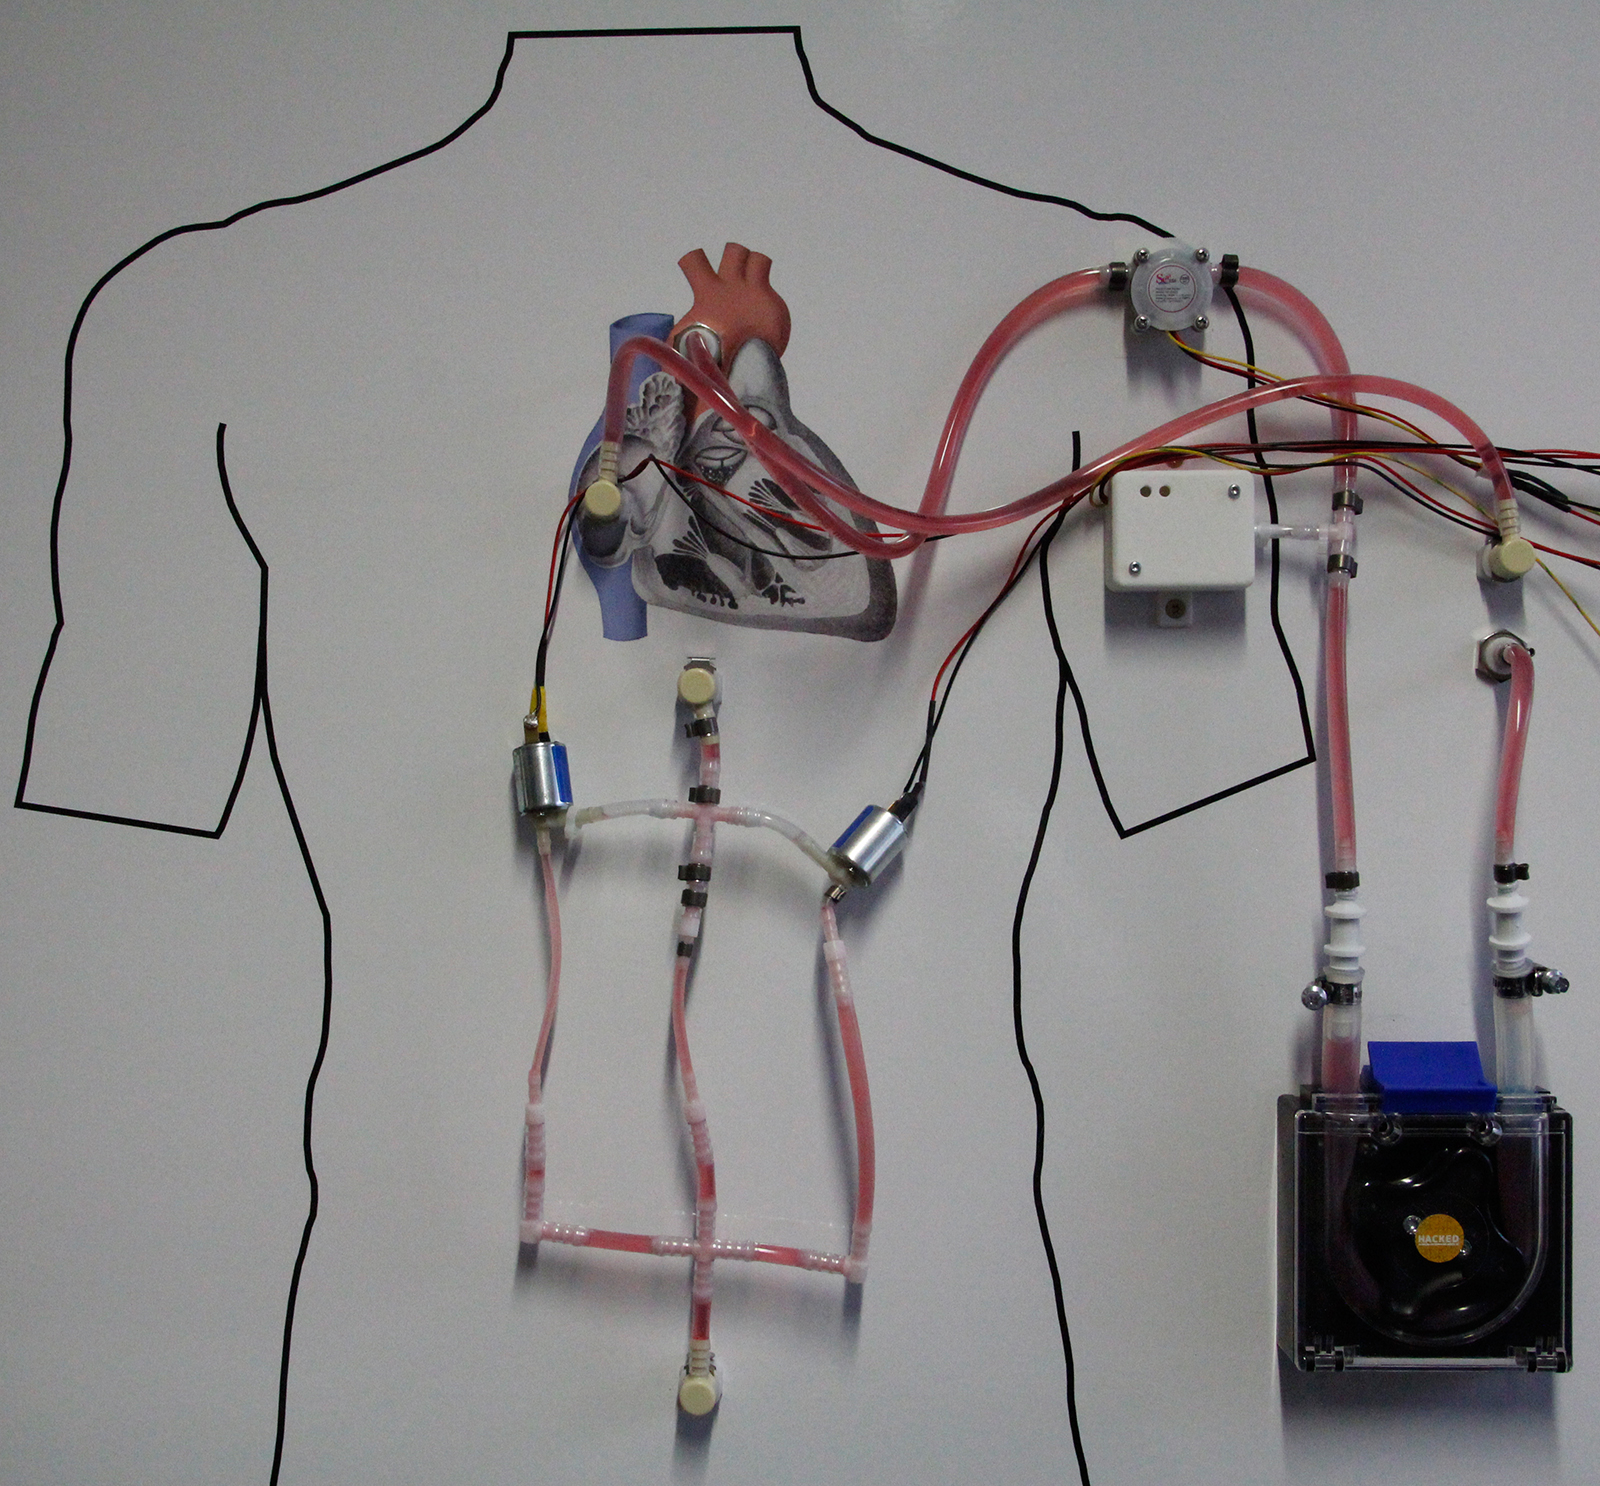 Exhibit to demonstrate the application potential of the hardware-in-the-loop method using the example of a heart assist pump.